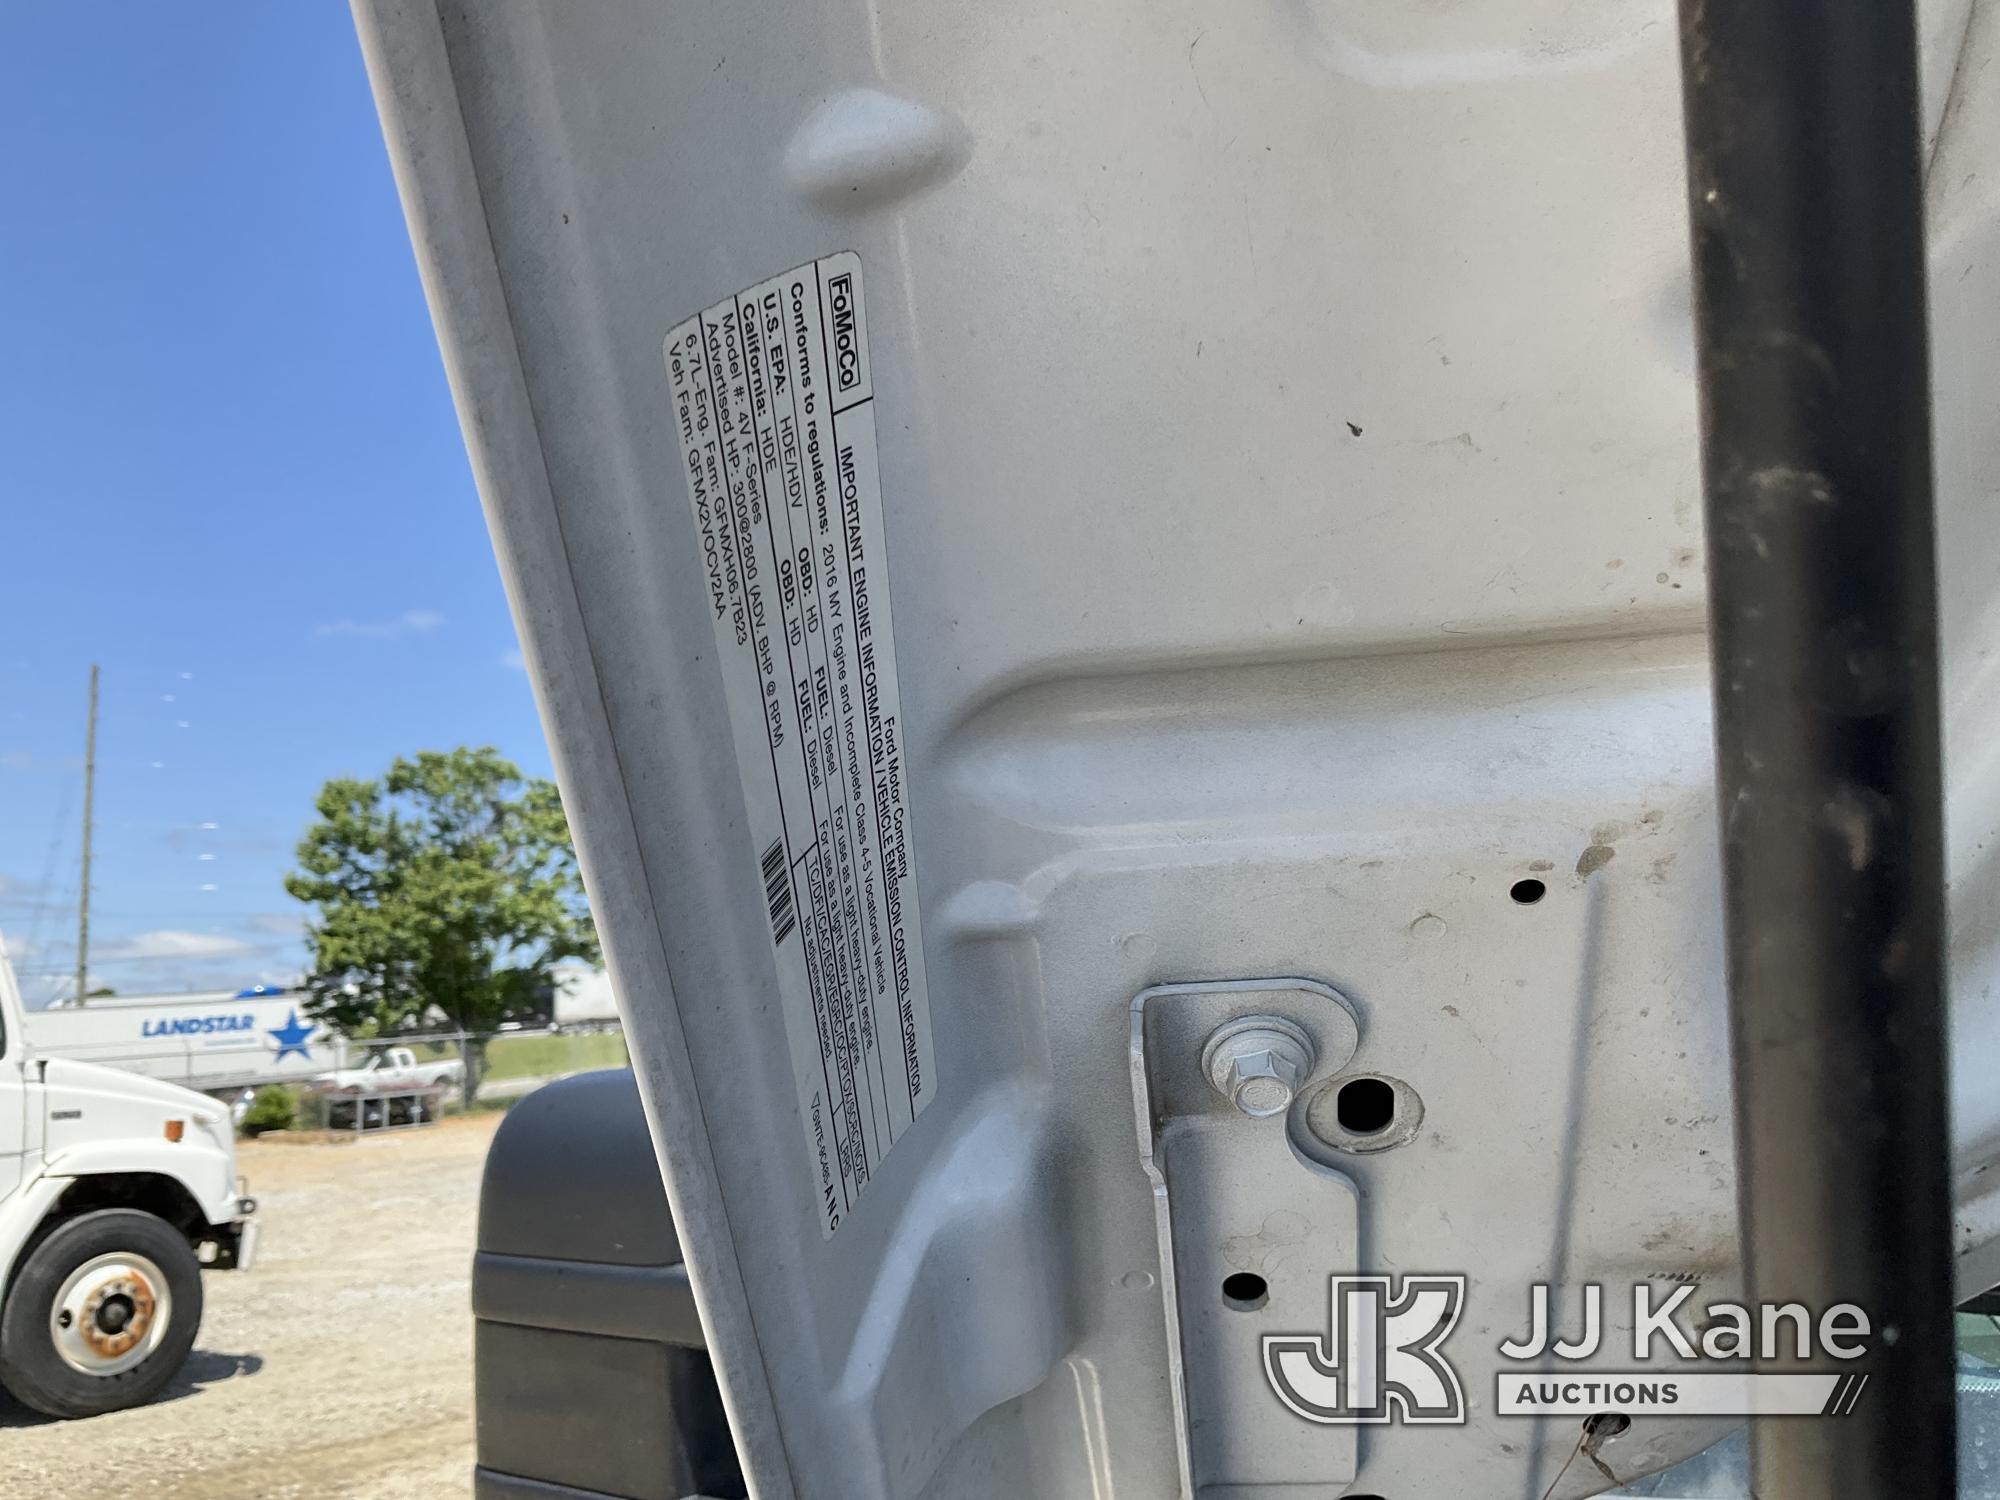 (Villa Rica, GA) Altec AT200-A, Telescopic Non-Insulated Bucket Truck mounted behind cab on 2016 For